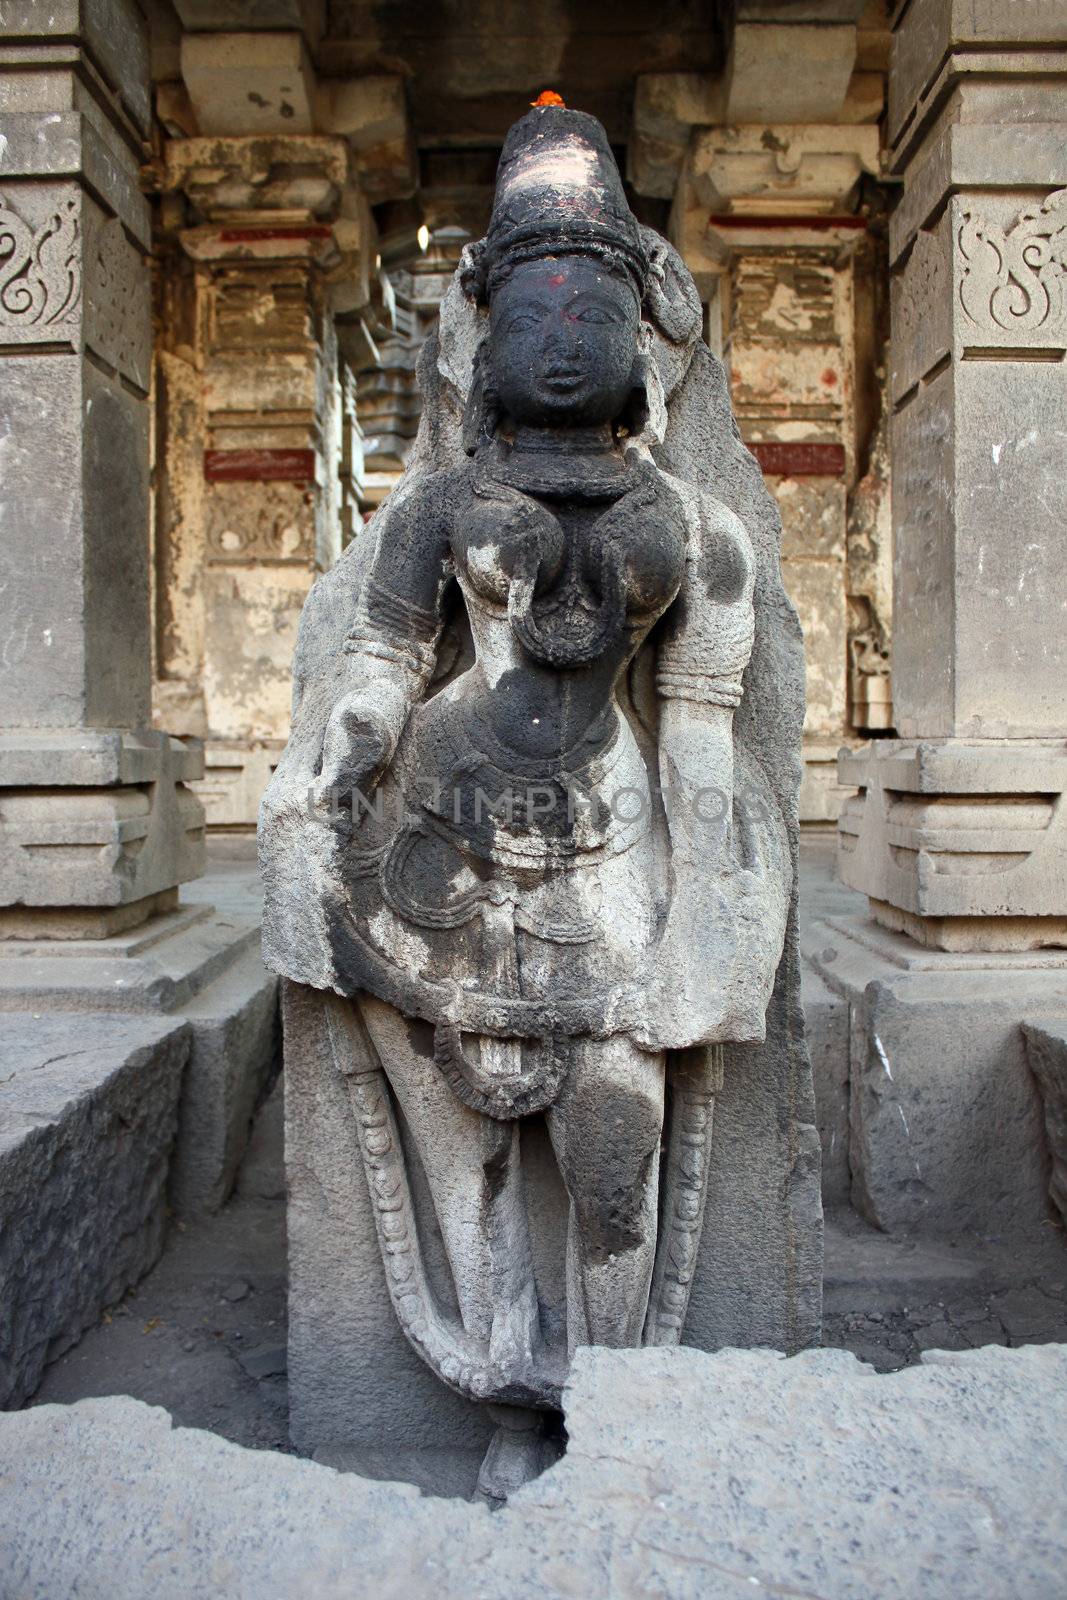 A very ancient sculpture of lord Vishnu in the temple ruins of Kudalsangam in India.